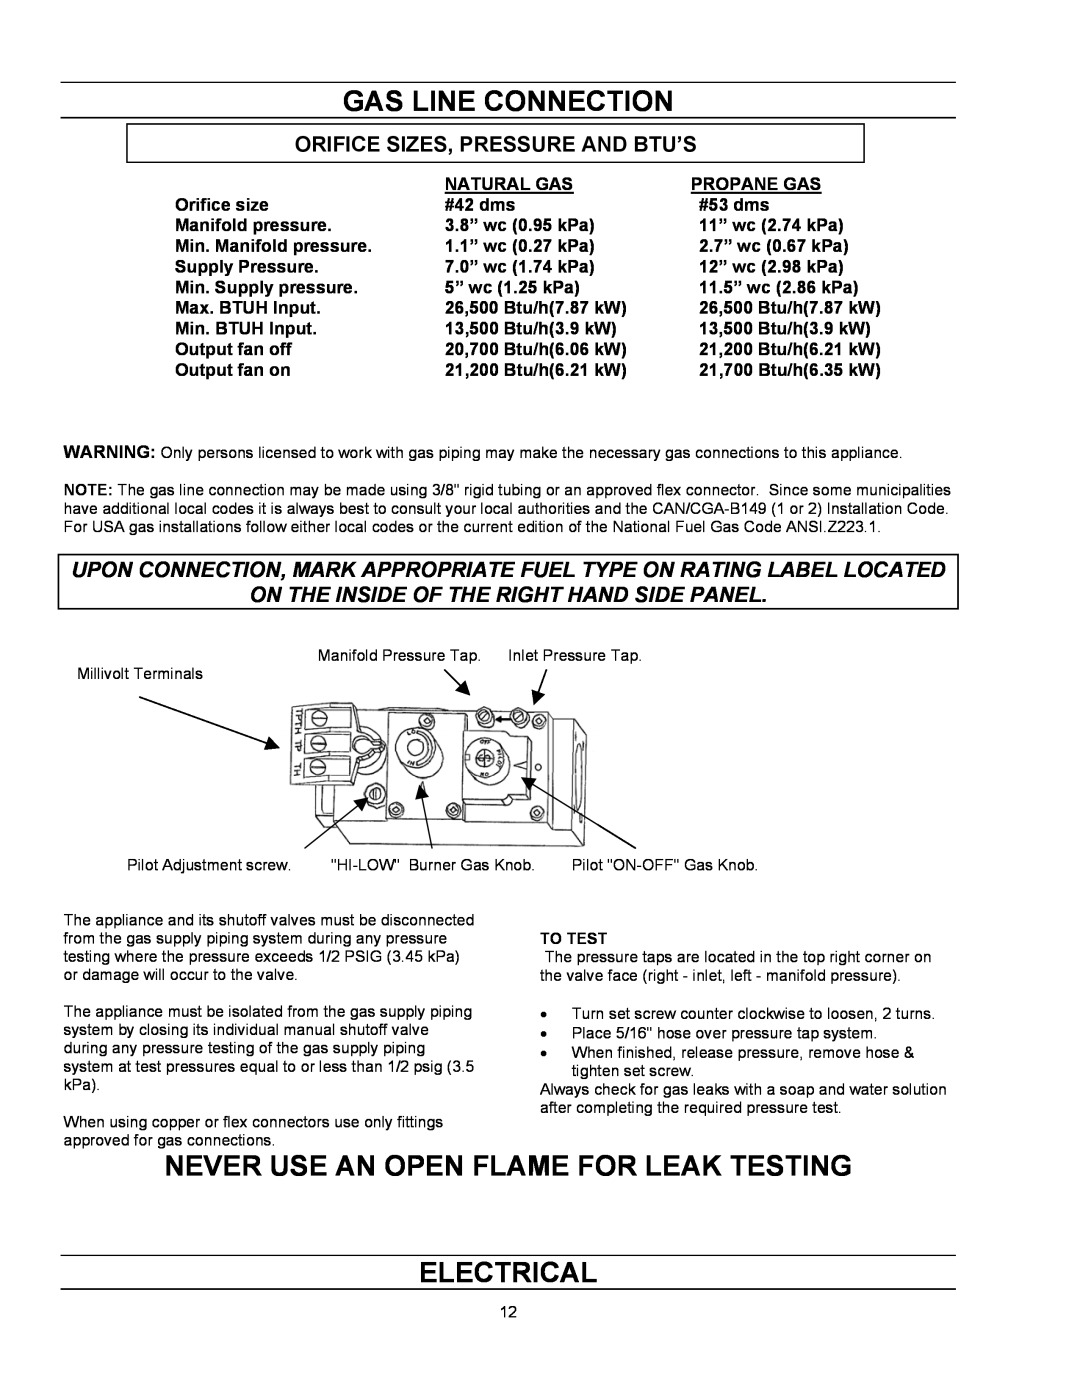 Enviro EG 28 B owner manual Gas Line Connection, Never Use An Open Flame For Leak Testing, Electrical 